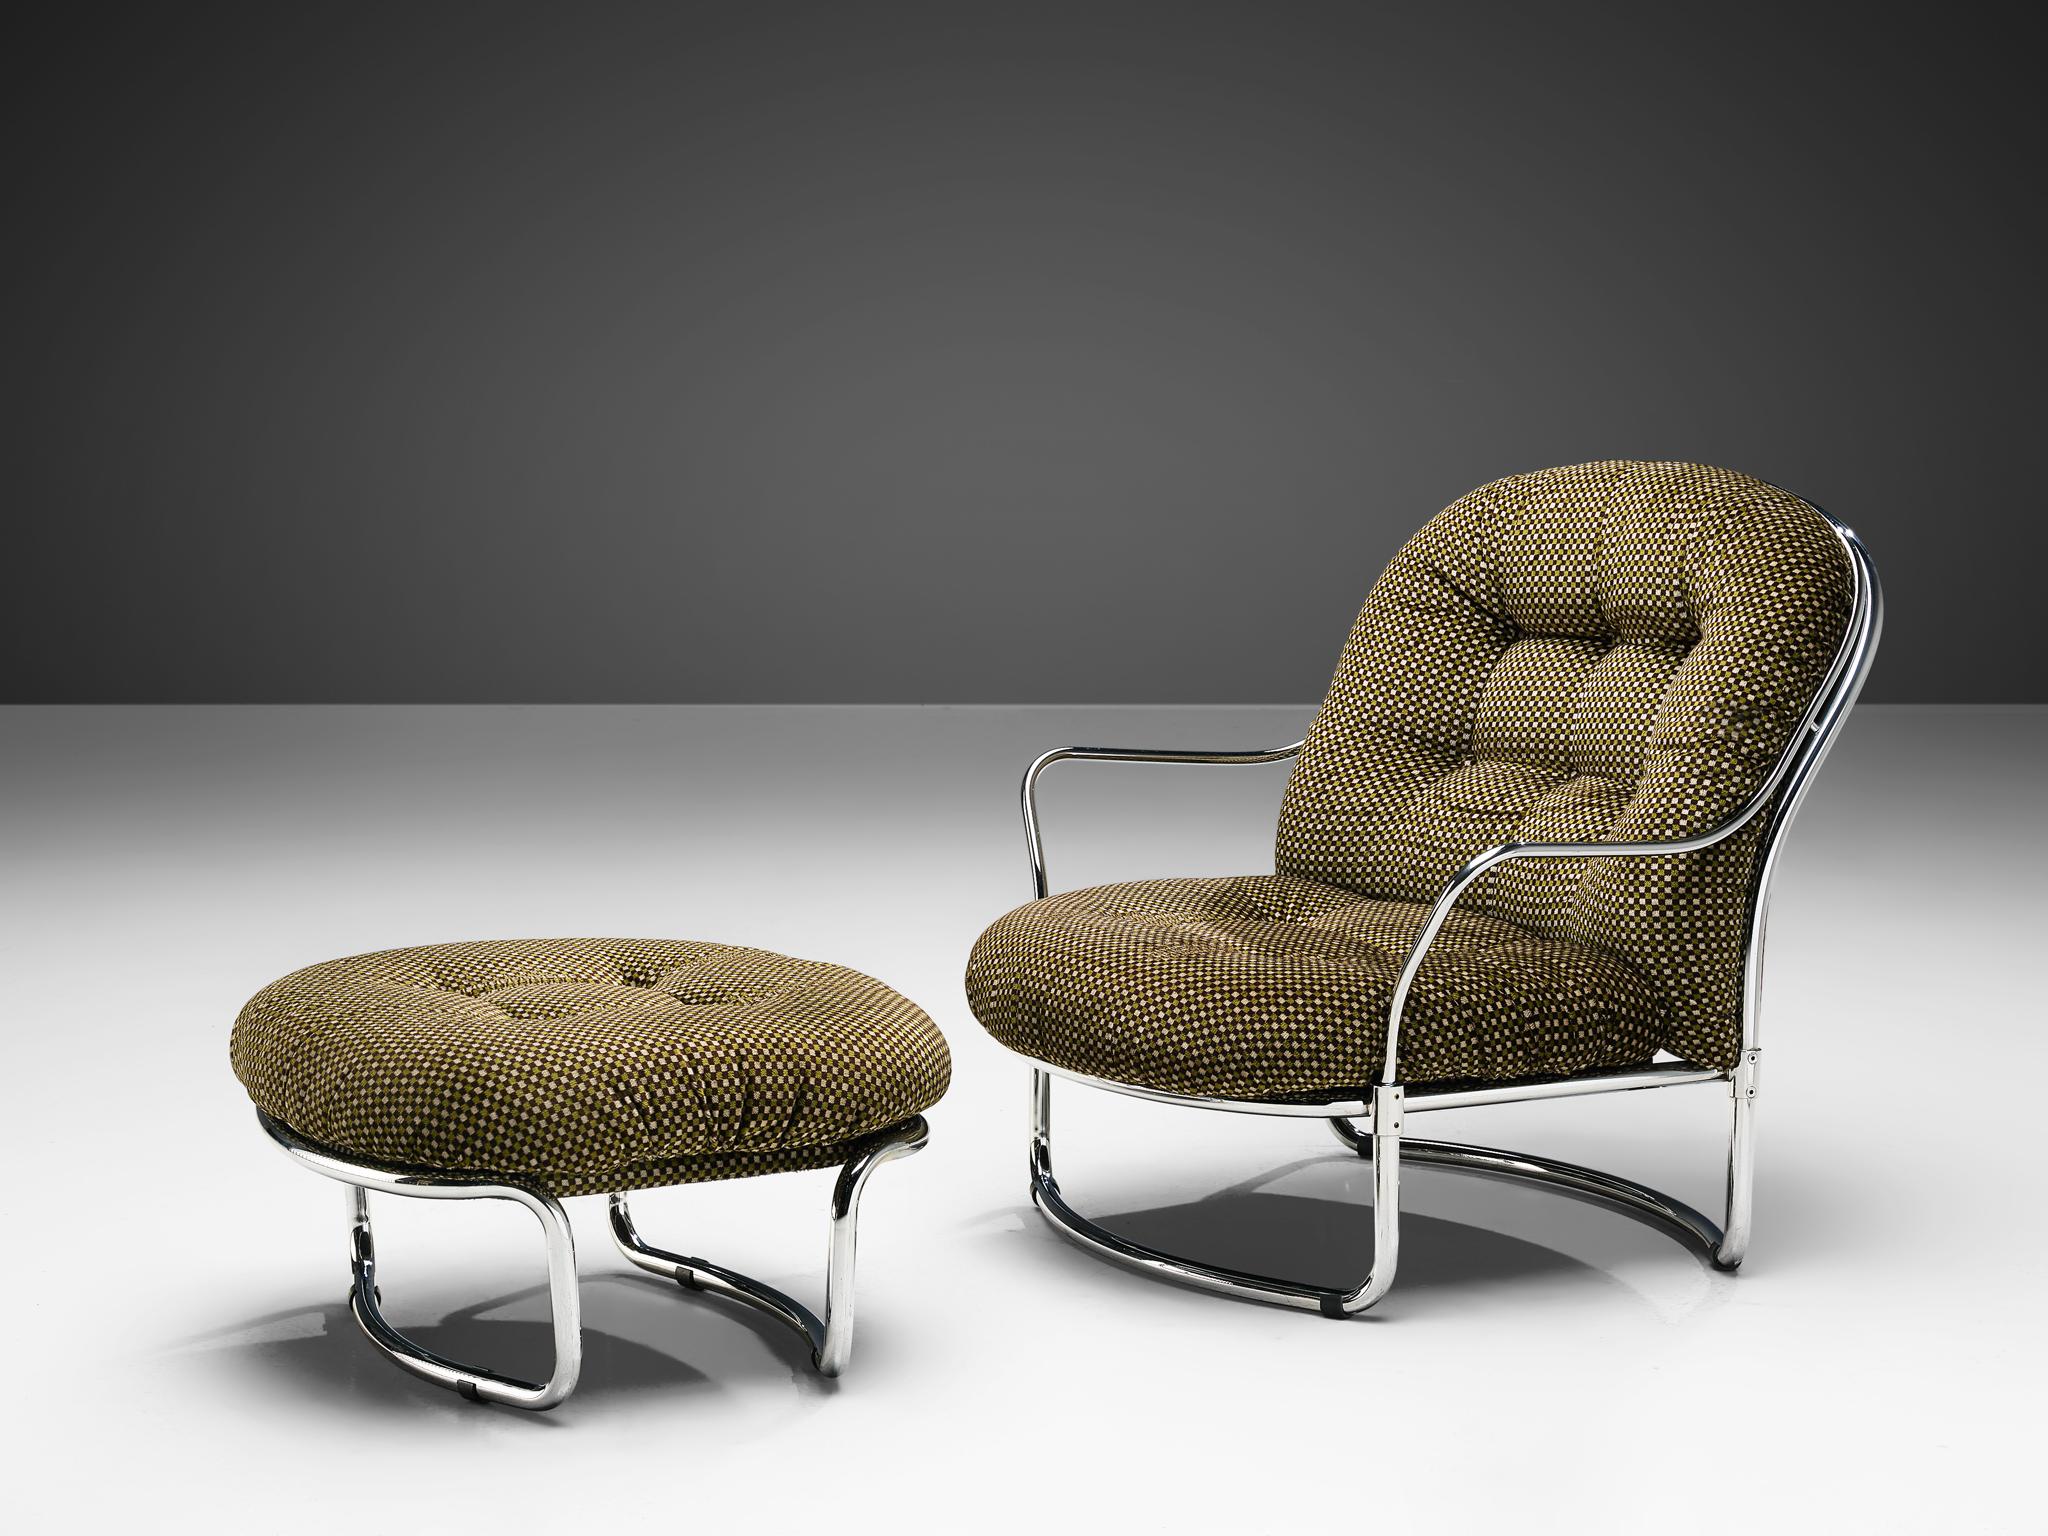 Carlo di Carli for Cinova, lounge chair with ottoman, no. 915, metal and green upholstery, Italy, 1969.

Elegant, tubular armchair with ottoman designed by Carlo di Carli in 1969 and manufactured by Cinova Italy. The model features a curved, nickled